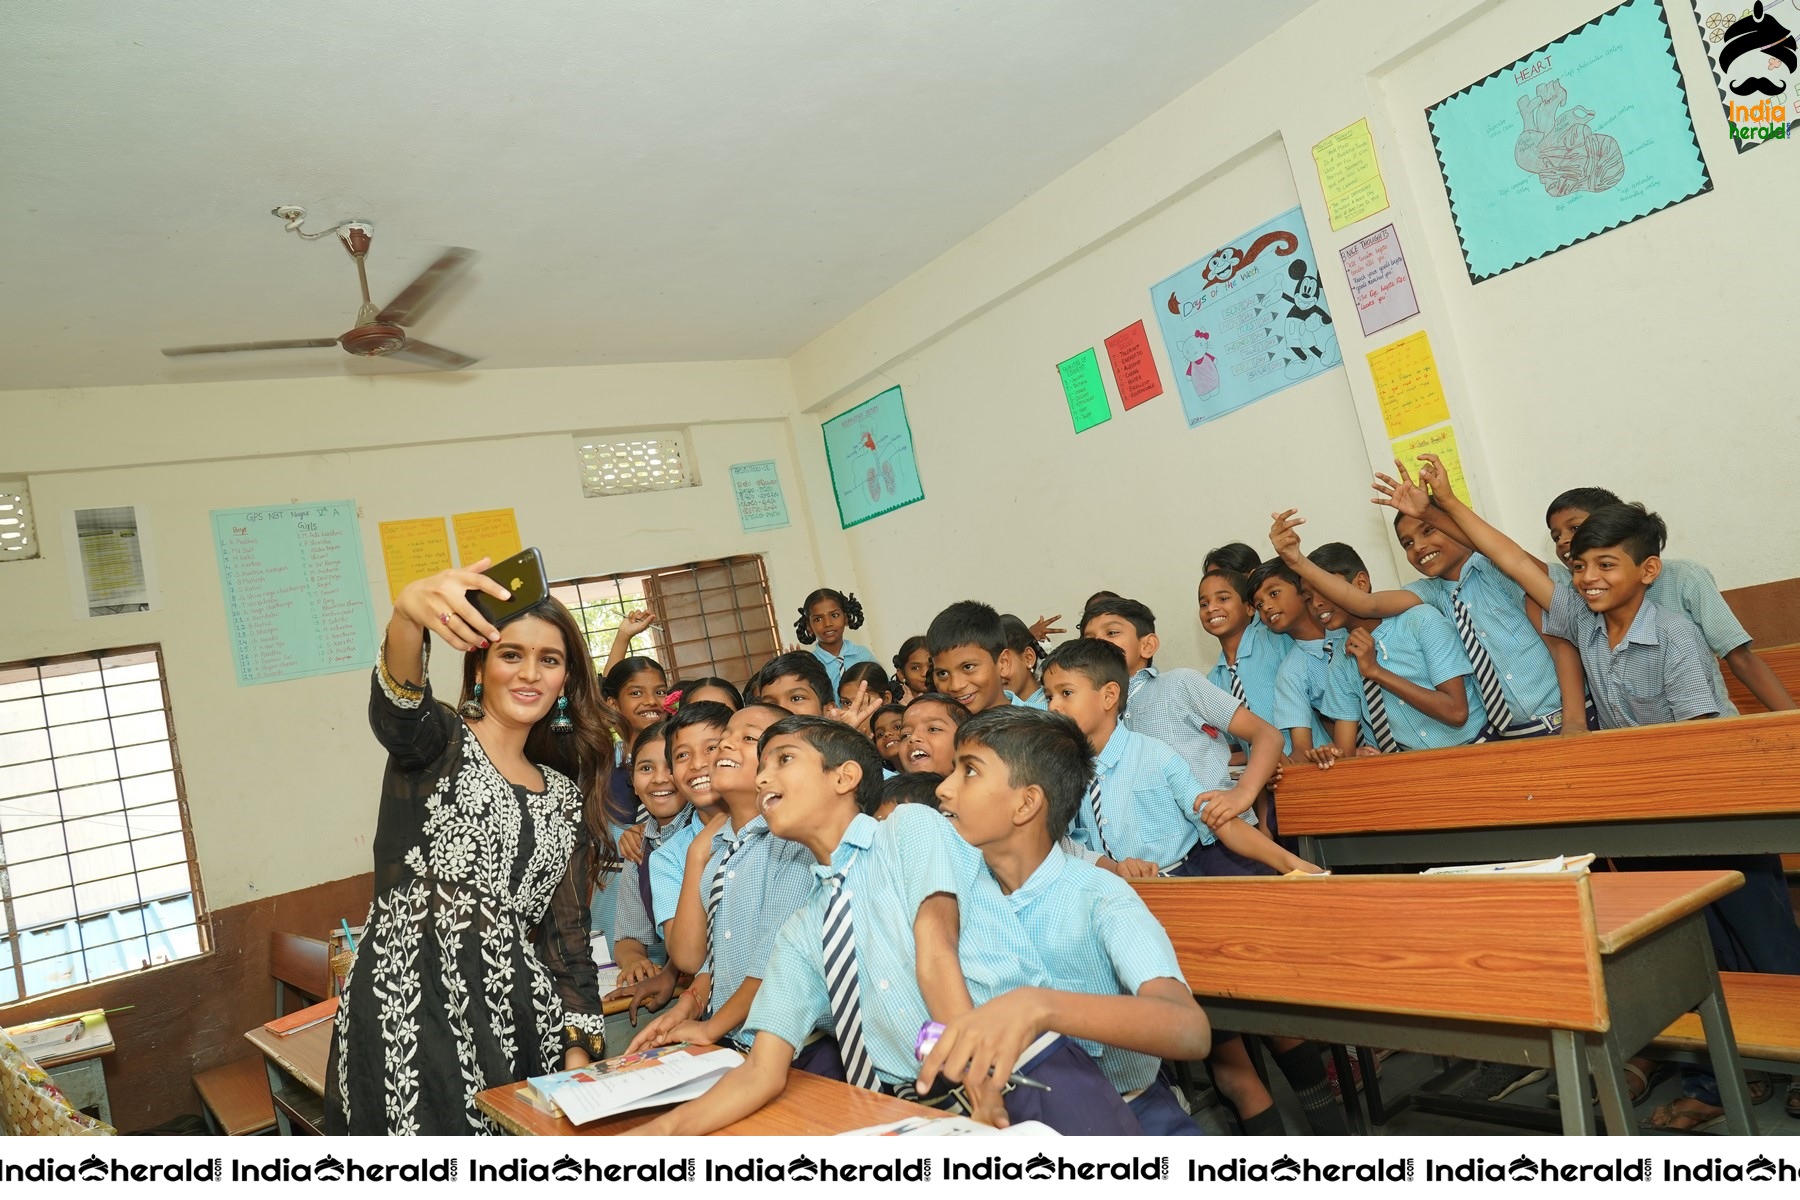 Nidhhi Agerwal Teaches English To Pega Teach For Change Supported Kids Set 2